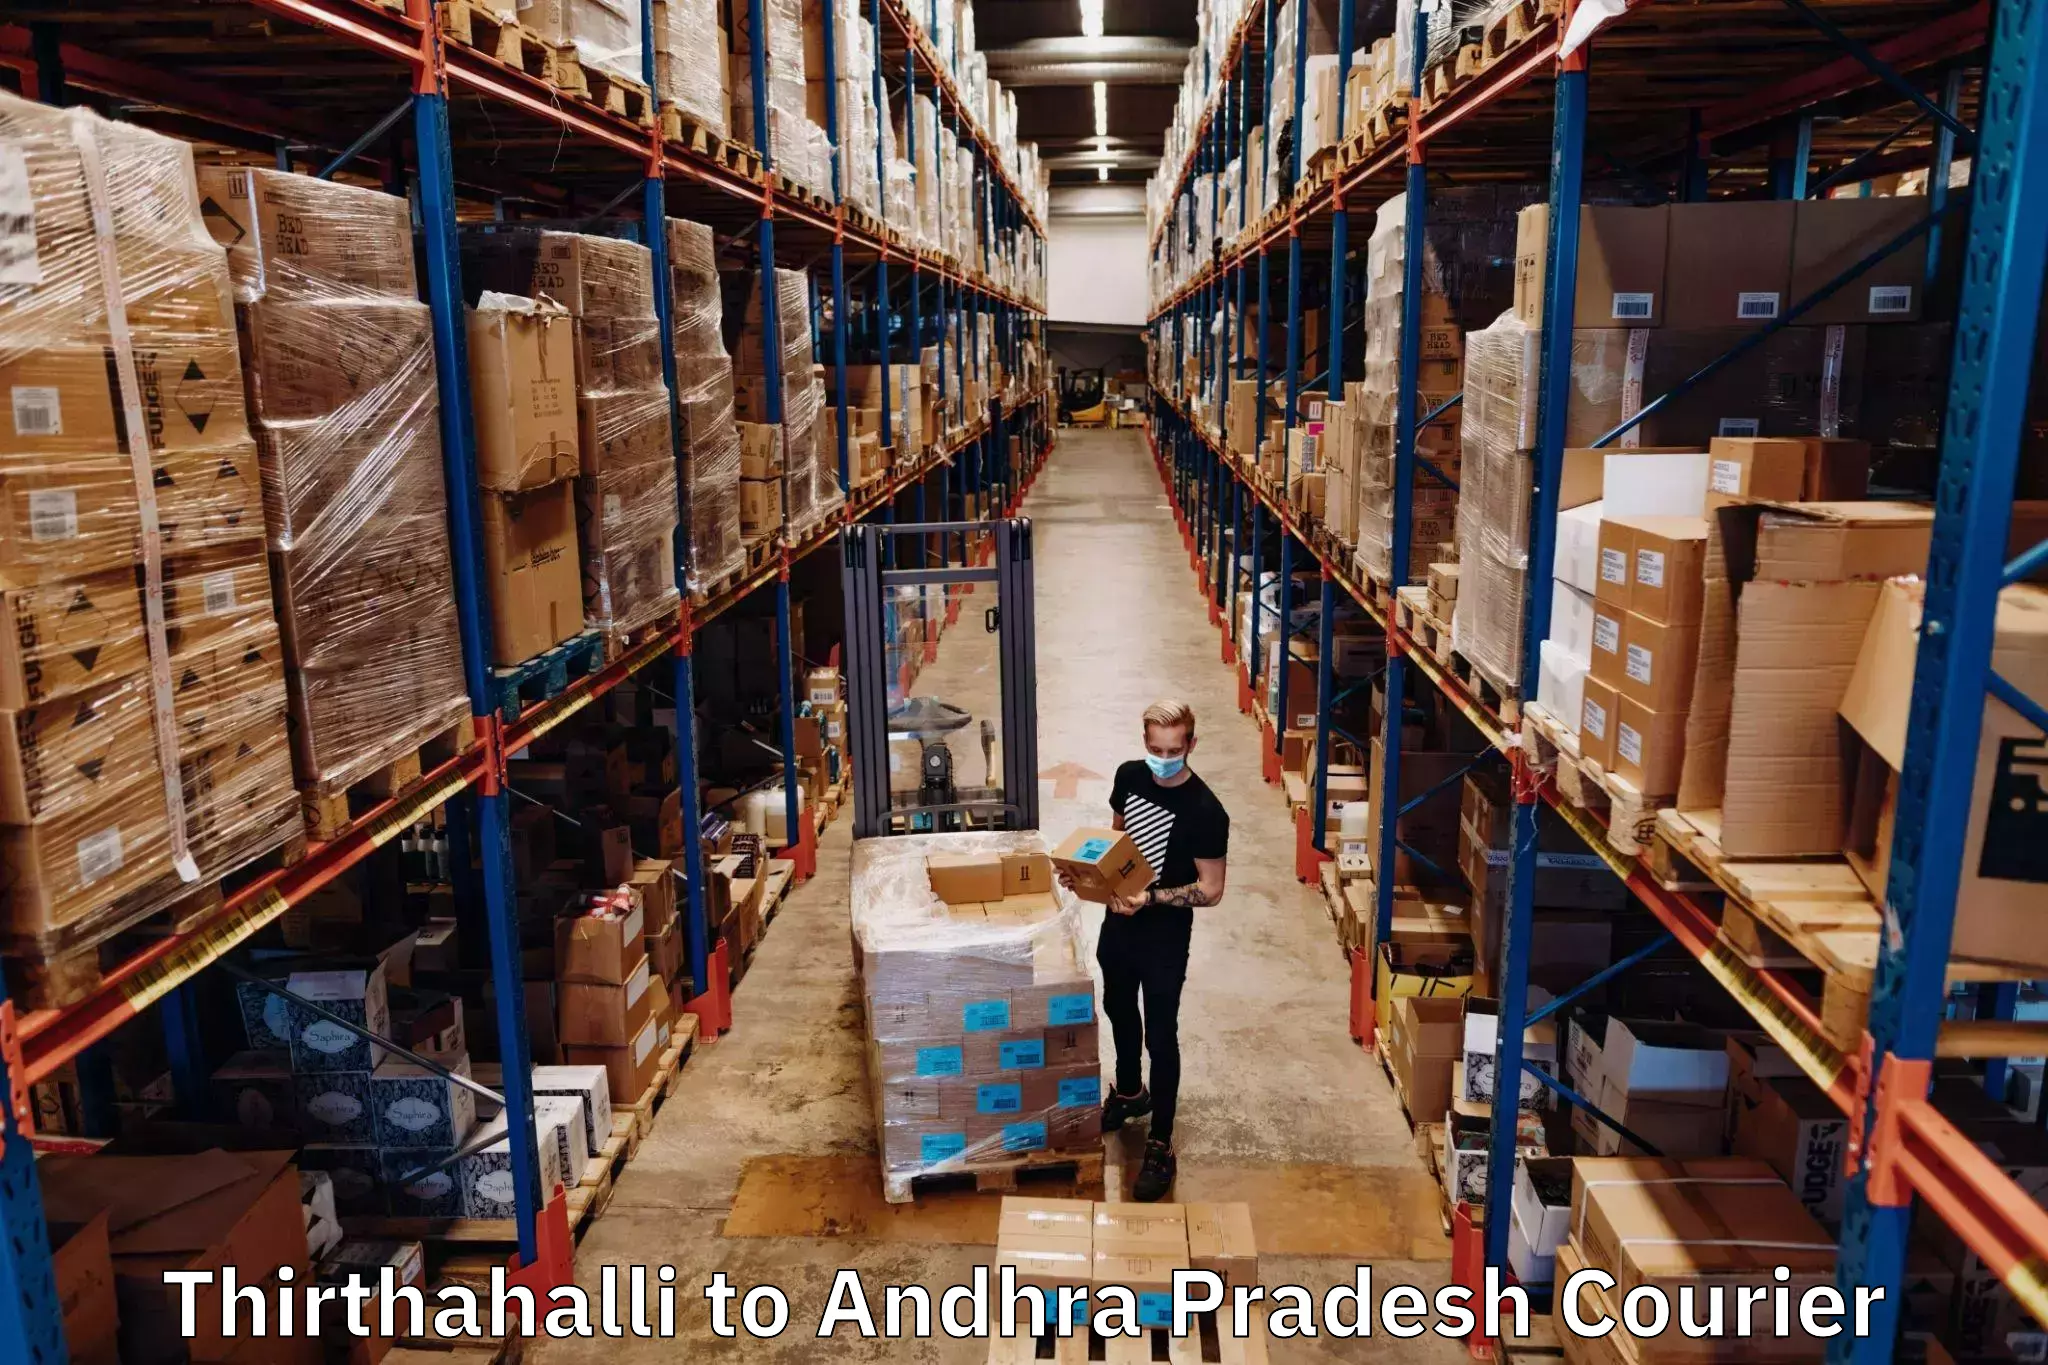 Subscription-based courier Thirthahalli to Akividu